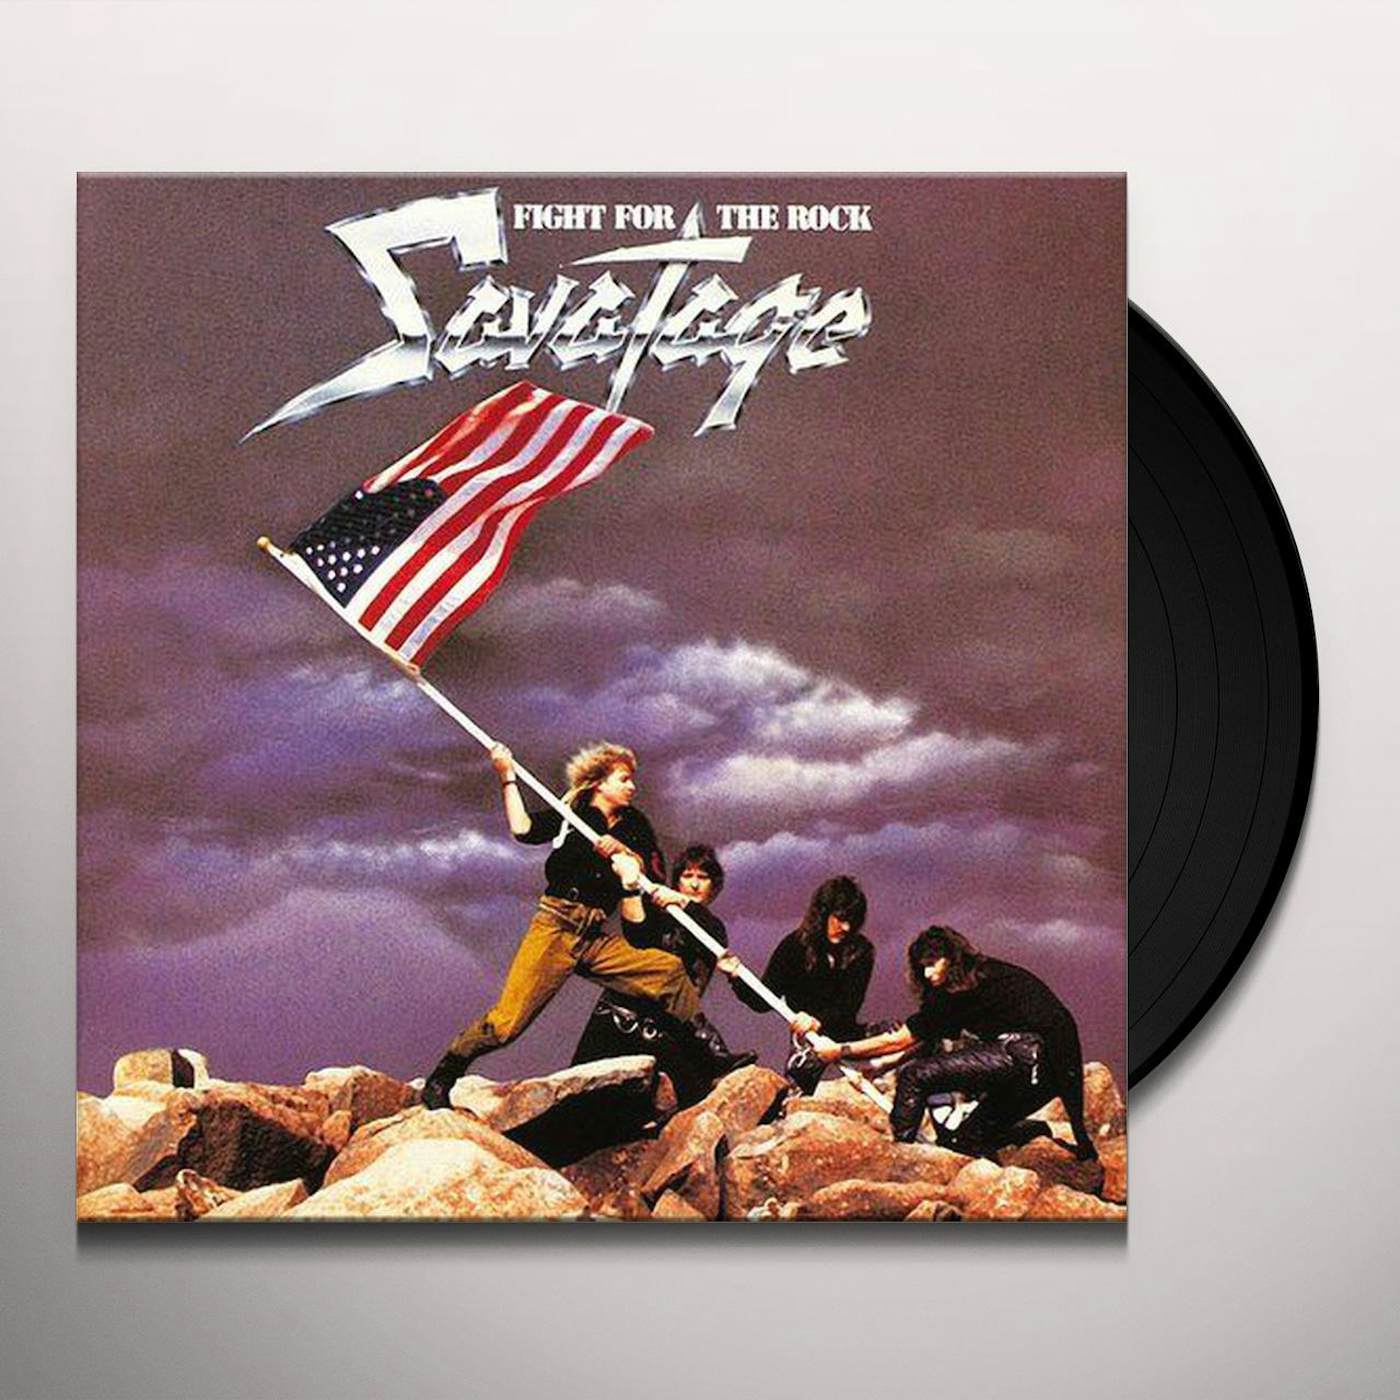 Savatage FIGHT FOR THE ROCK Vinyl Record